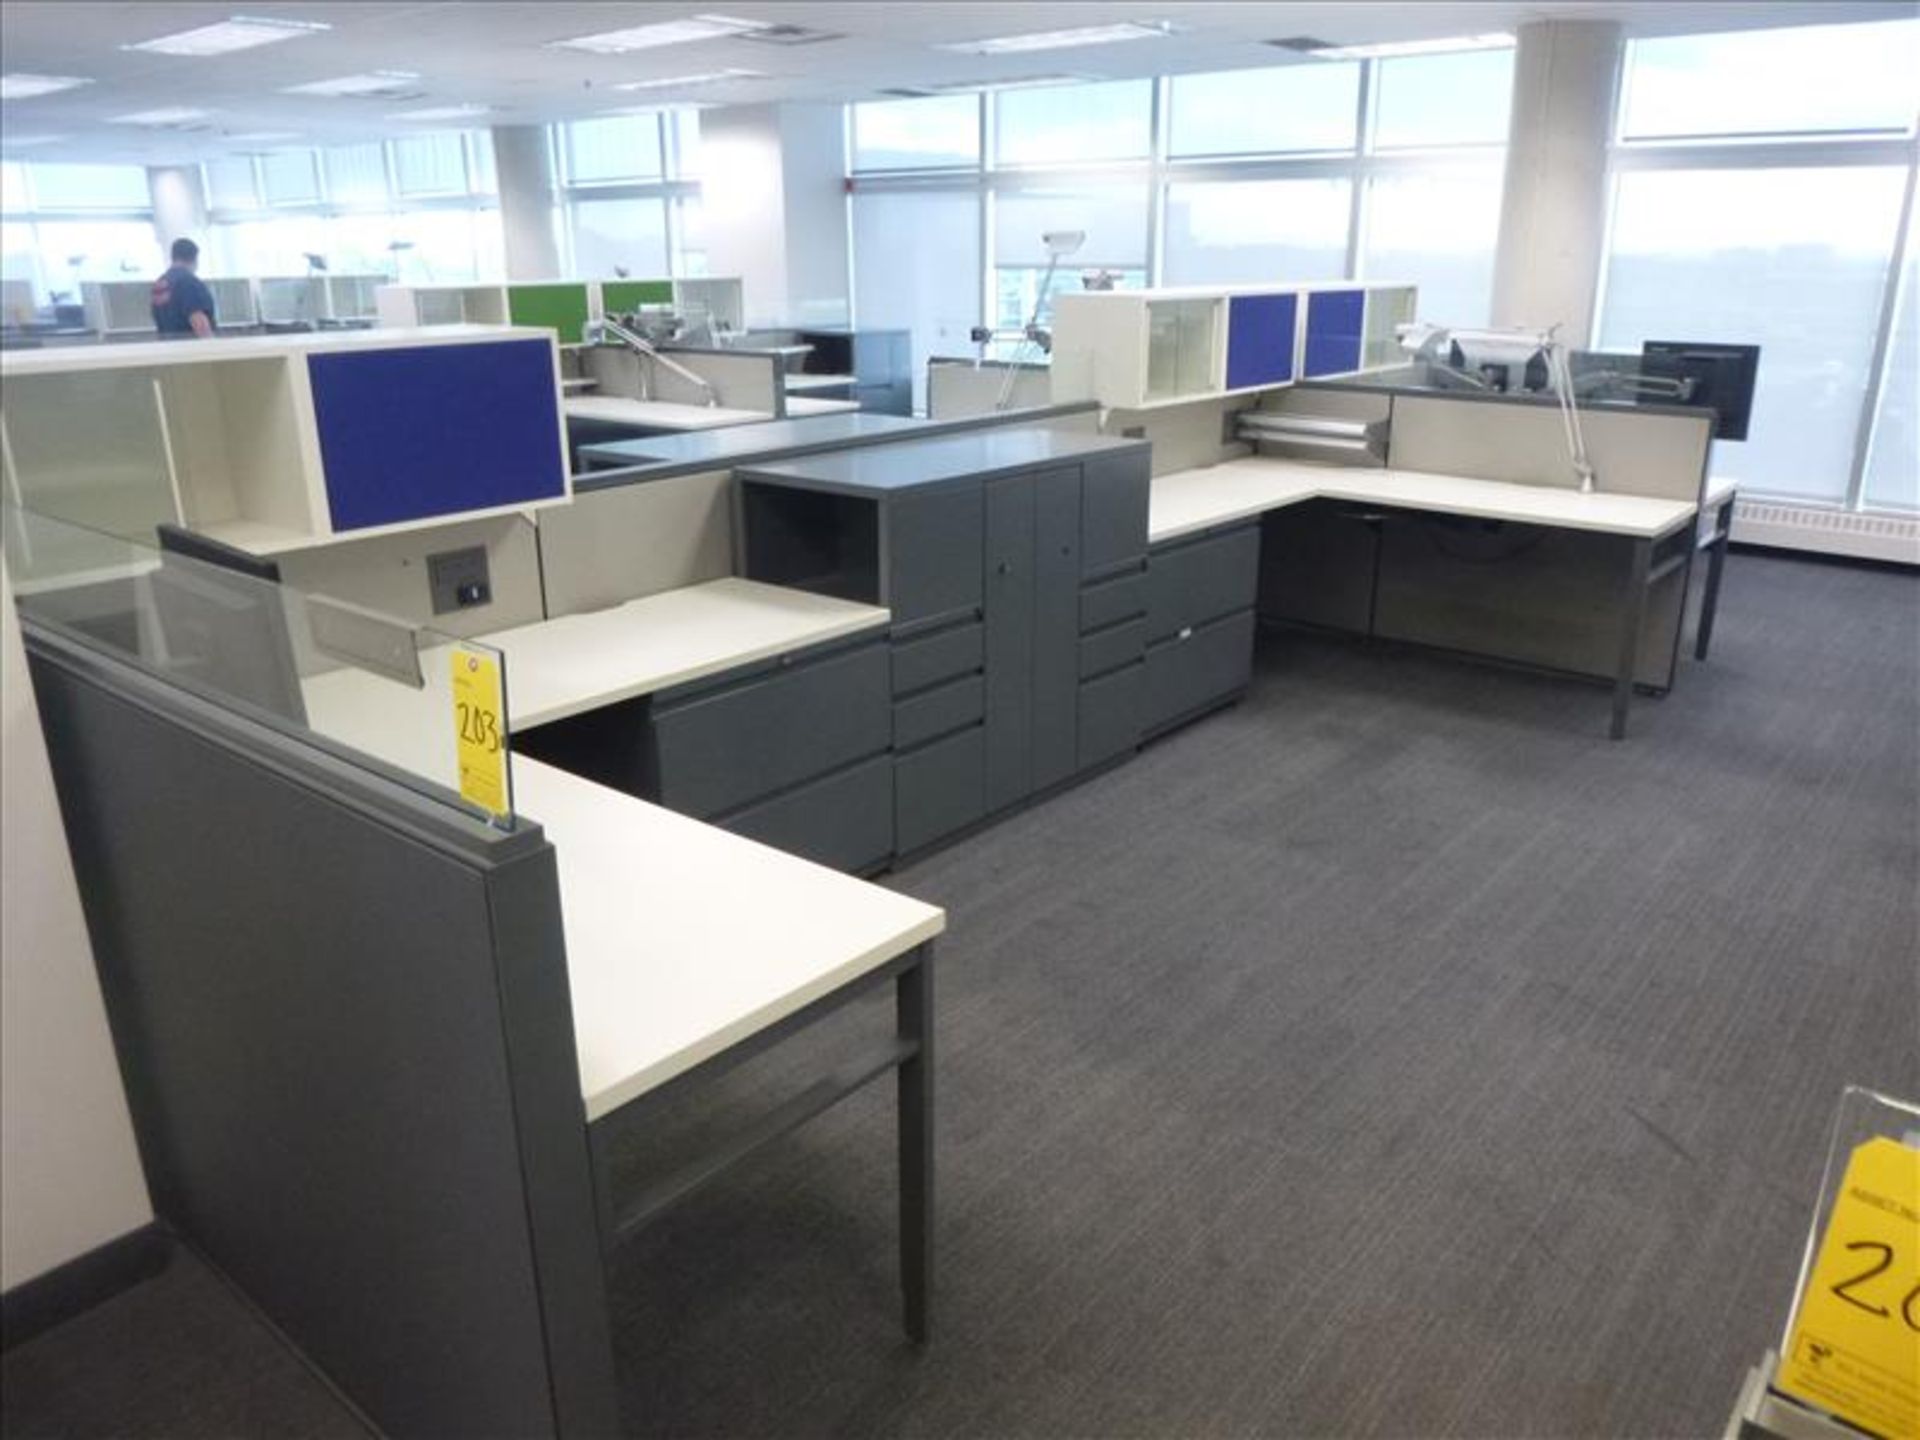 (6) Haworth cubicle workstations, approx. 12' x 24' footprint (excl. contents and office